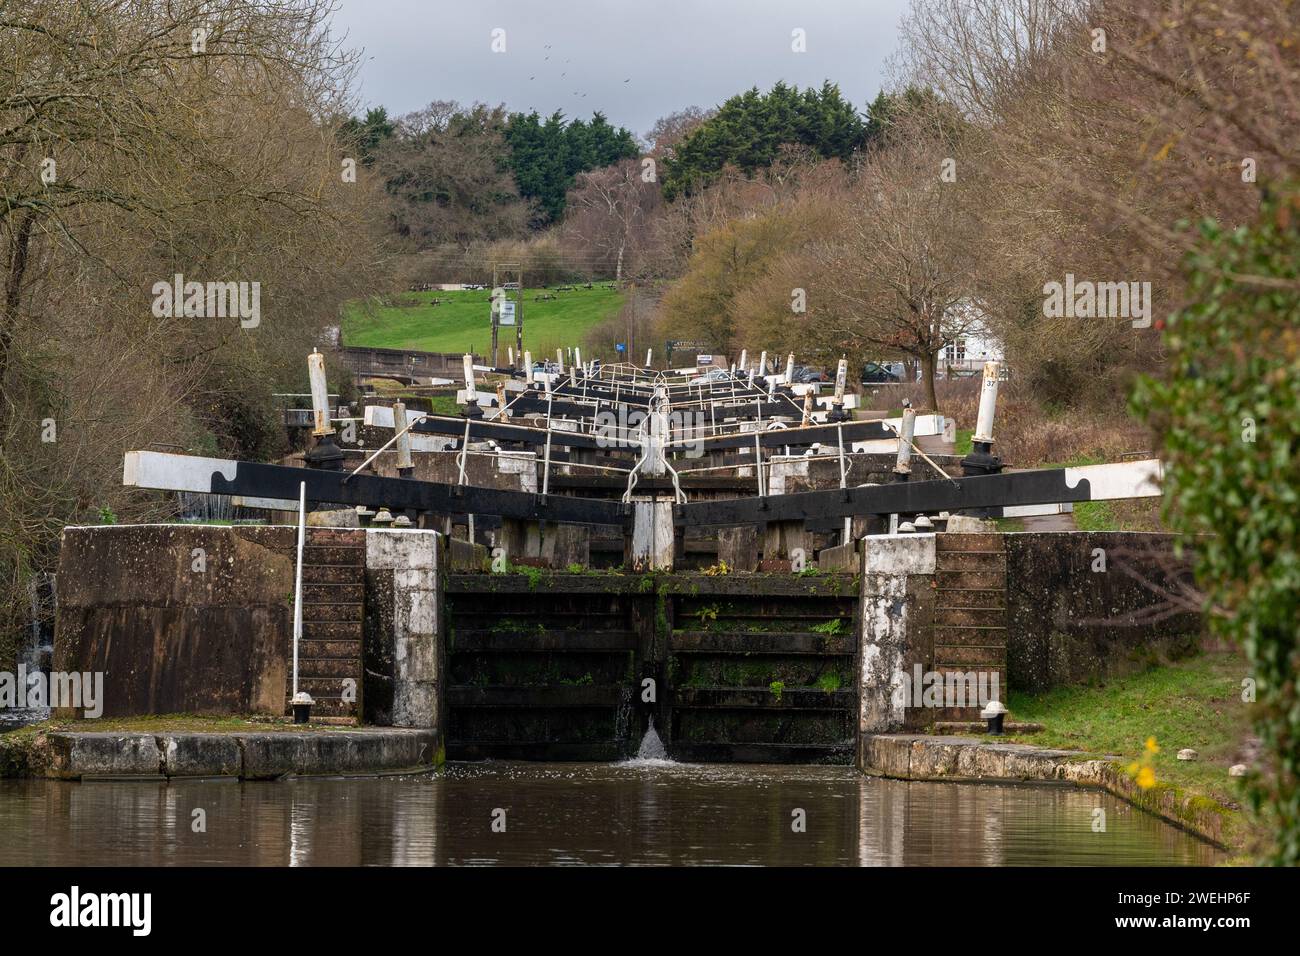 Hatton Locks on the Grand Union canal, Warwickshire, Royaume-Uni Banque D'Images